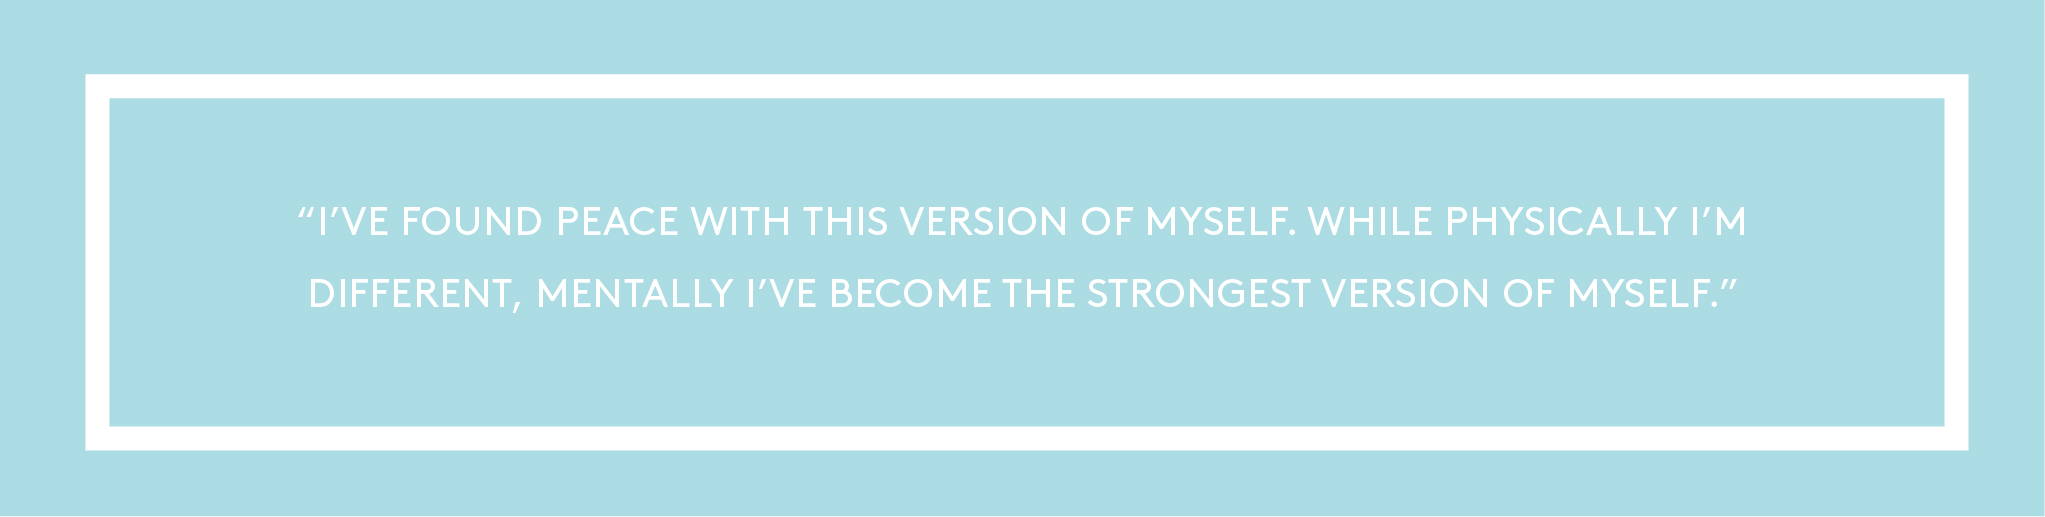 "I’ve found peace with this version of myself. While physically I’m different, mentally I’ve become the strongest version of myself."